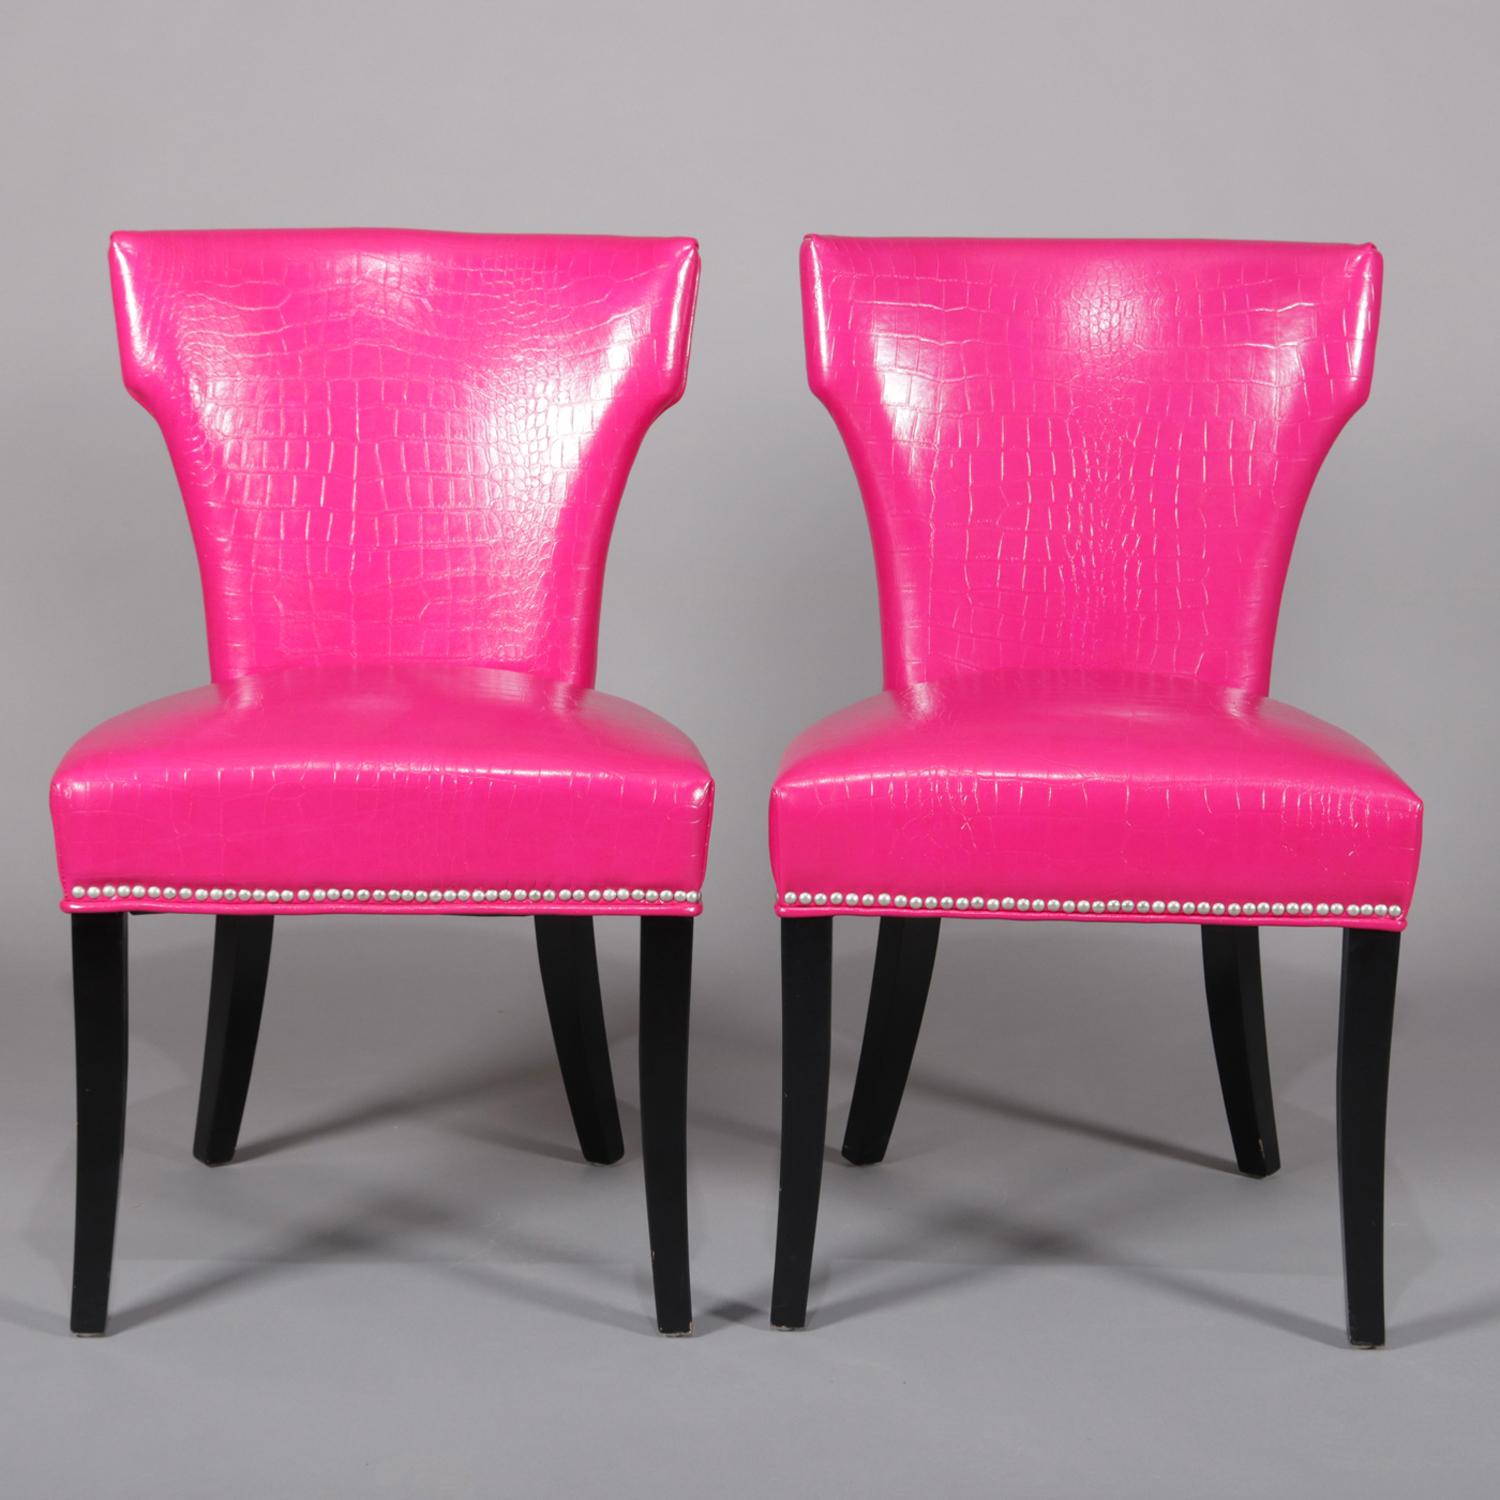 Pair of contemporary accent chairs feature fuschia pink alligator skin leatherette upholstery with shaped backs and raised on ebonized black legs, 20th century.

Measures: 37